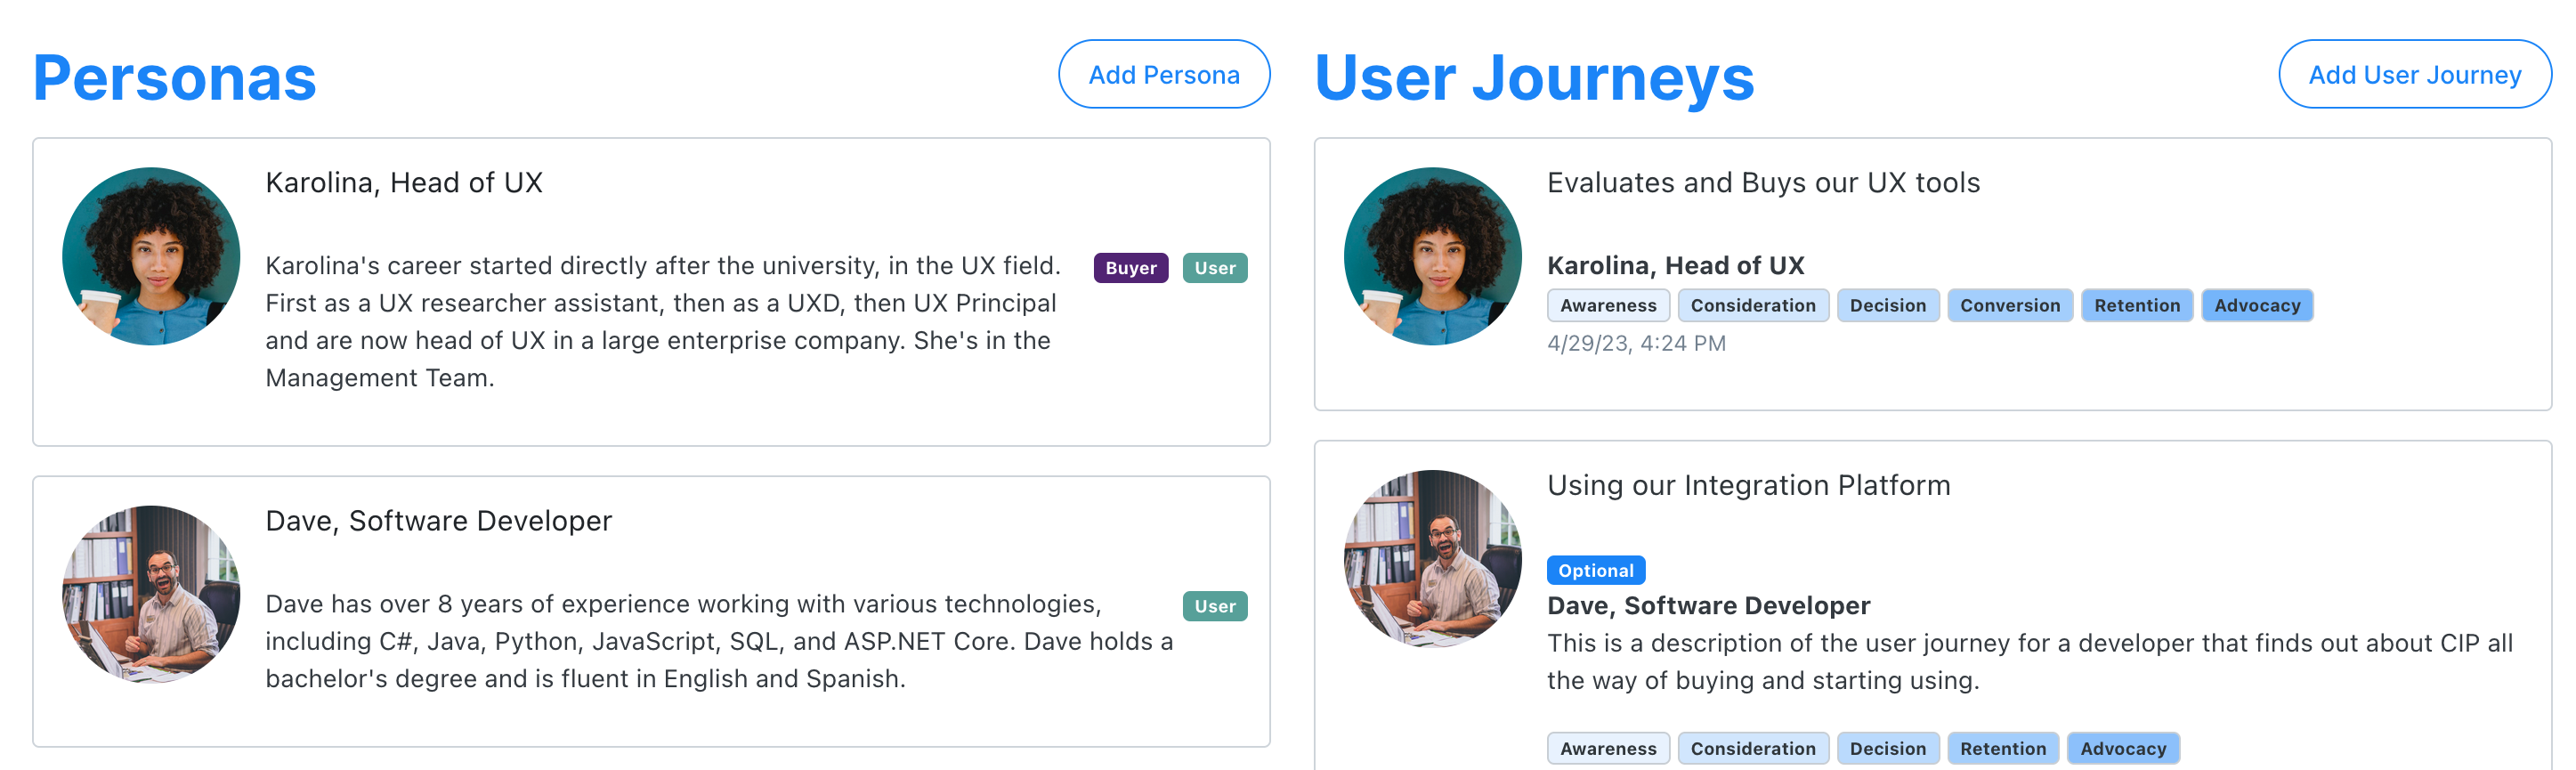 UX tools in Copyl keeps all User Personas and User Journeys in one place.